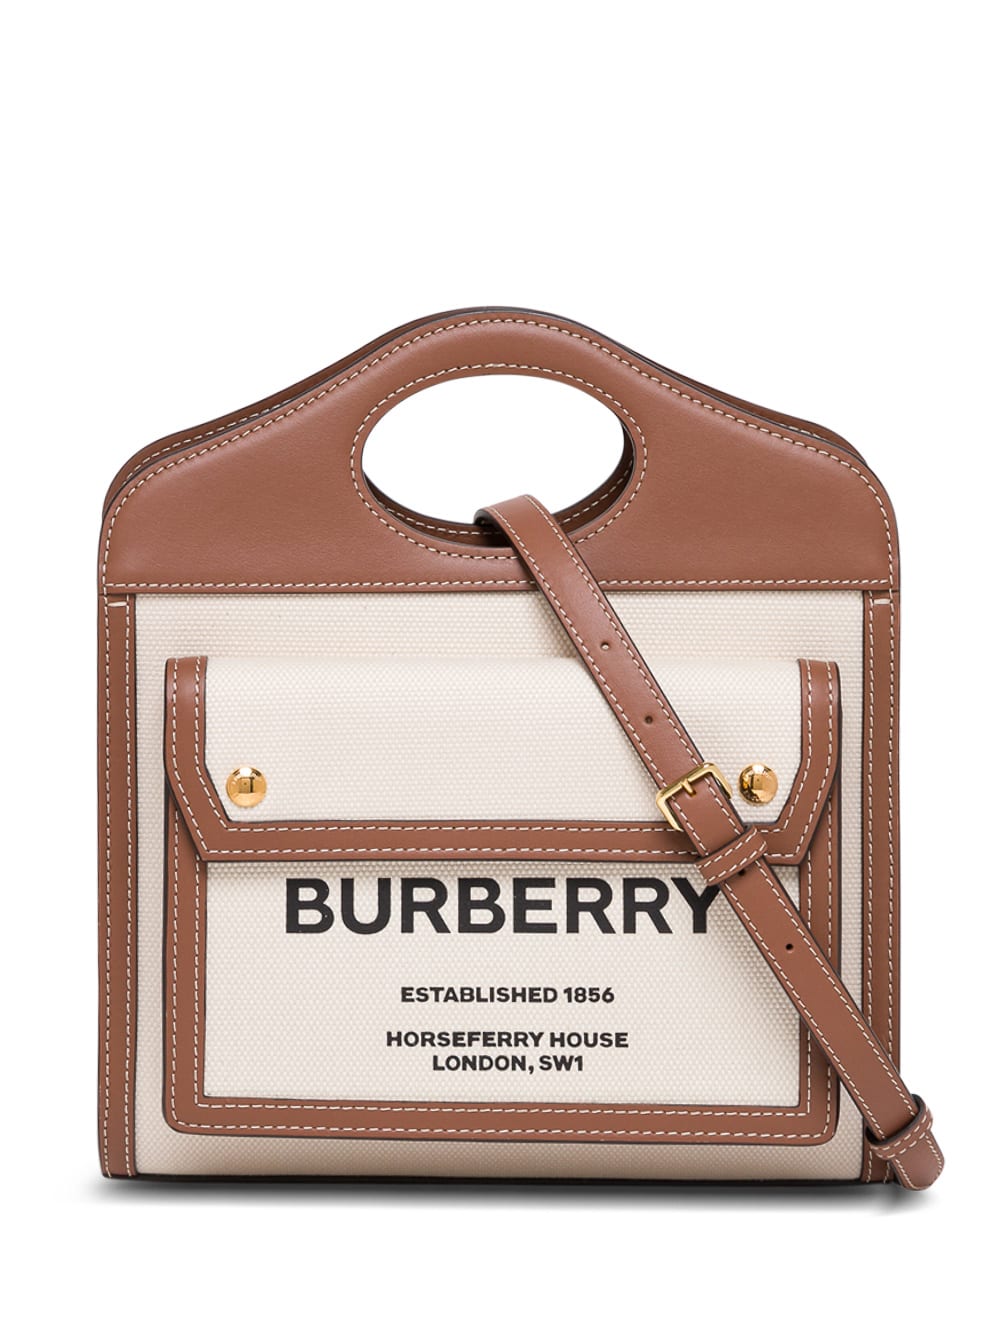 Burberry Fabric And Leather Handbag With Logo In Beige